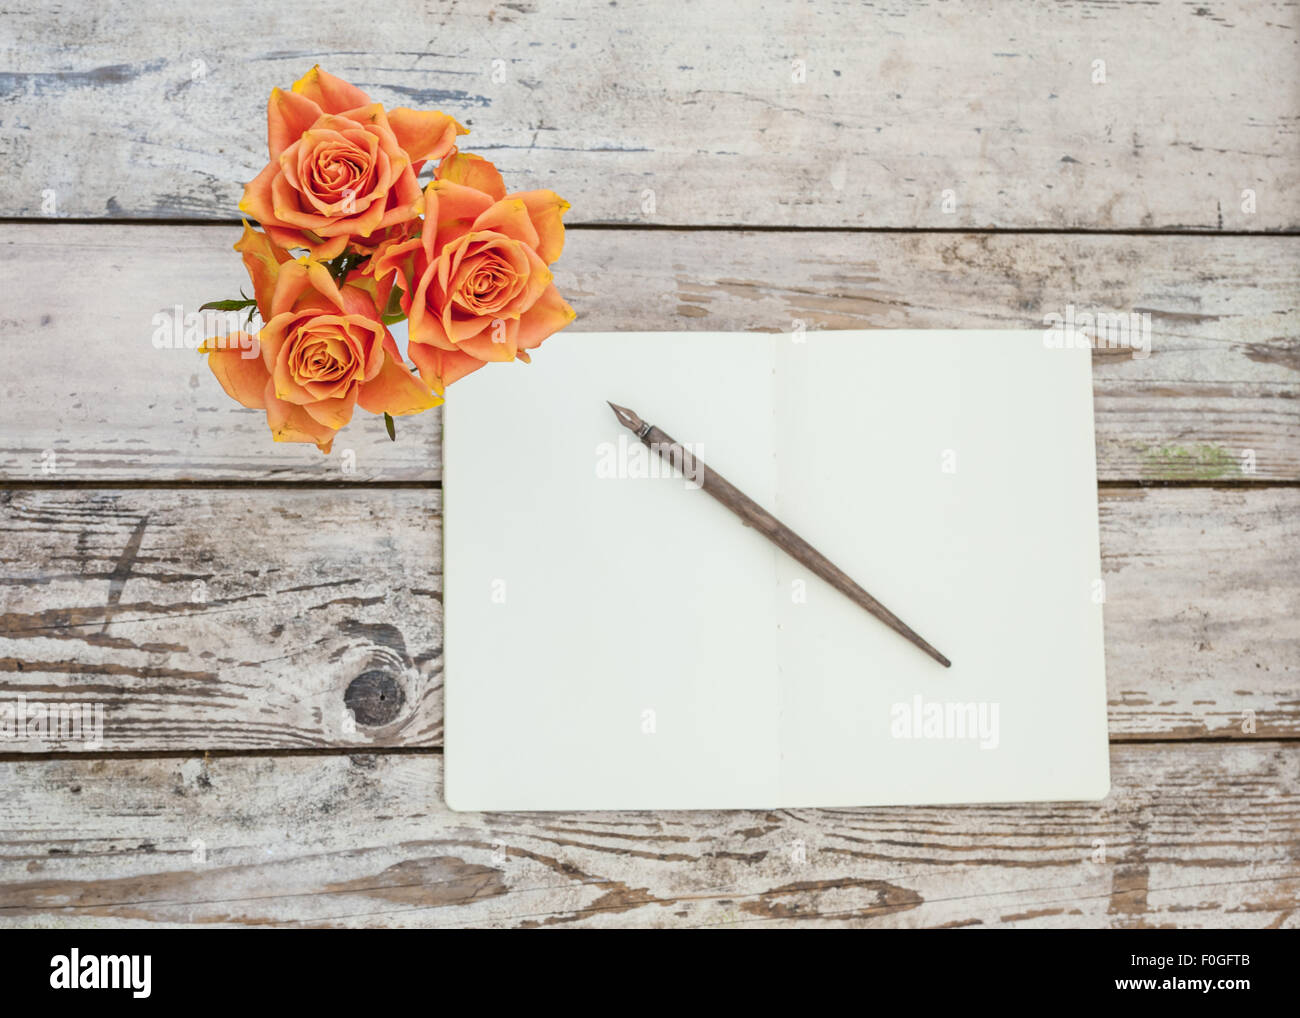 three orange roses on rustic wooden table with open notebook and pen Stock Photo